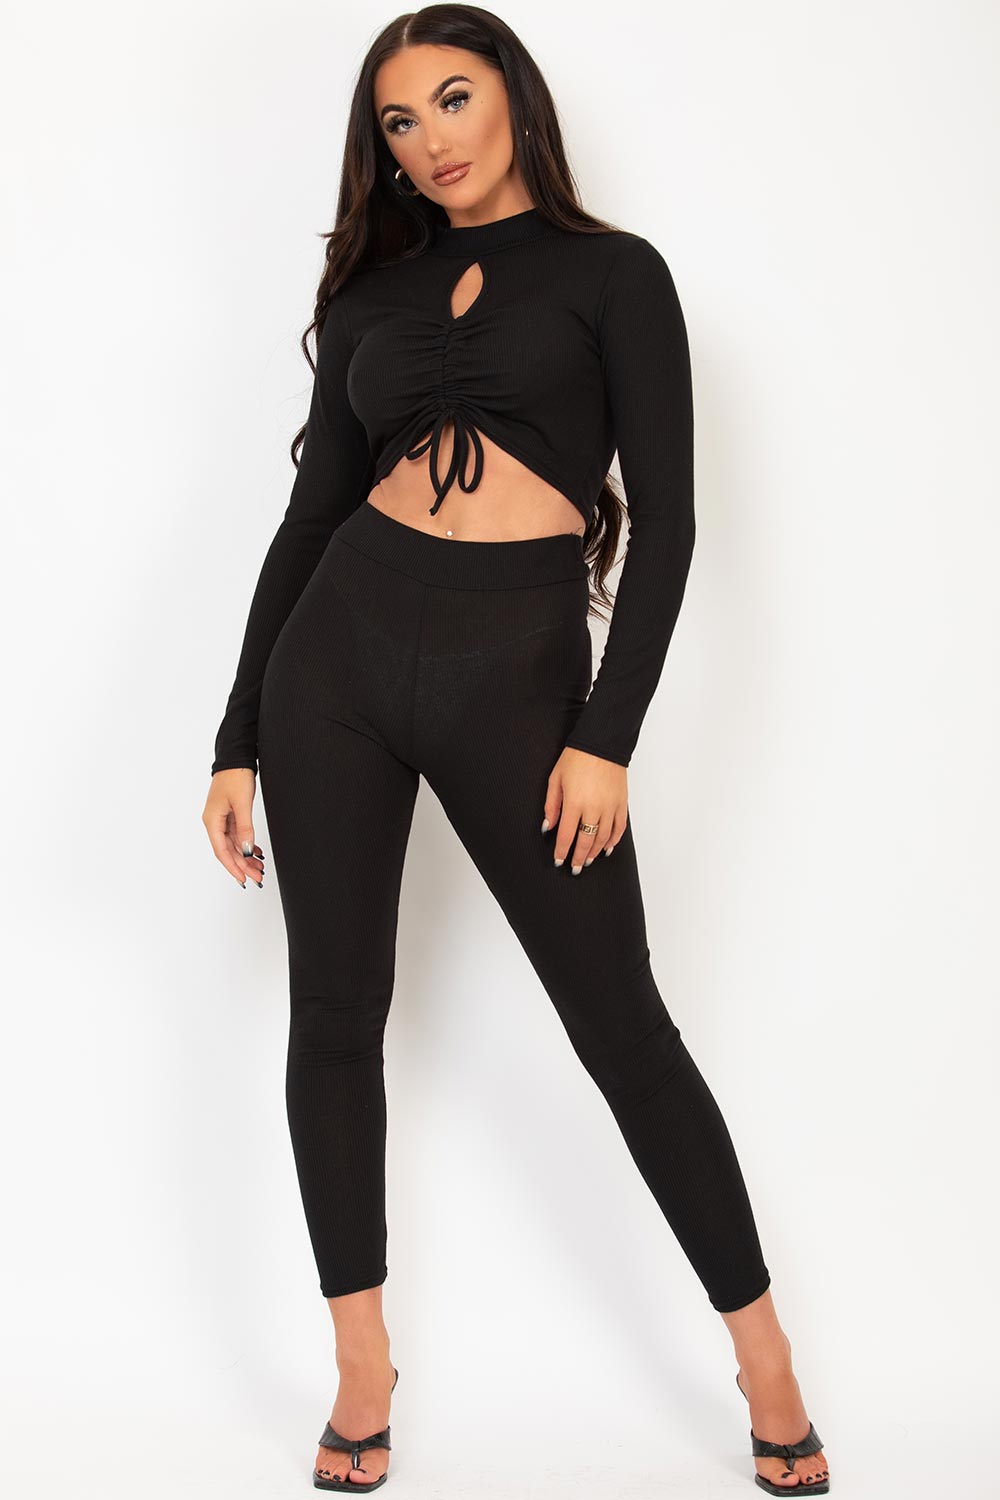 womens black lounge wear set with keyhole cut out front